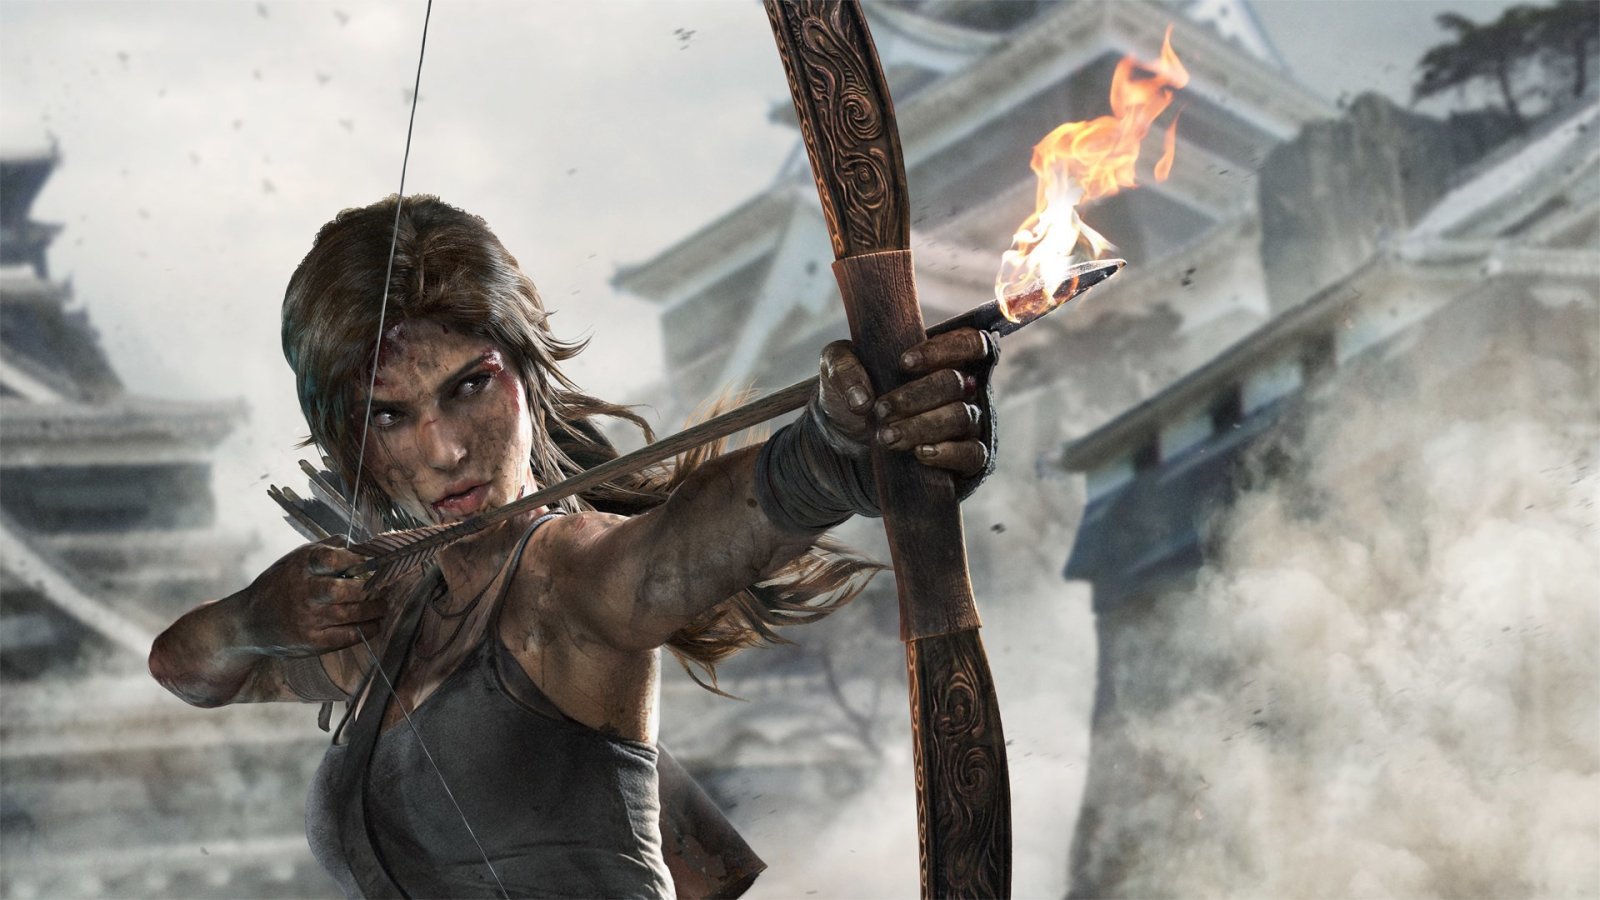 Tomb Raider is coming to Stadia in December